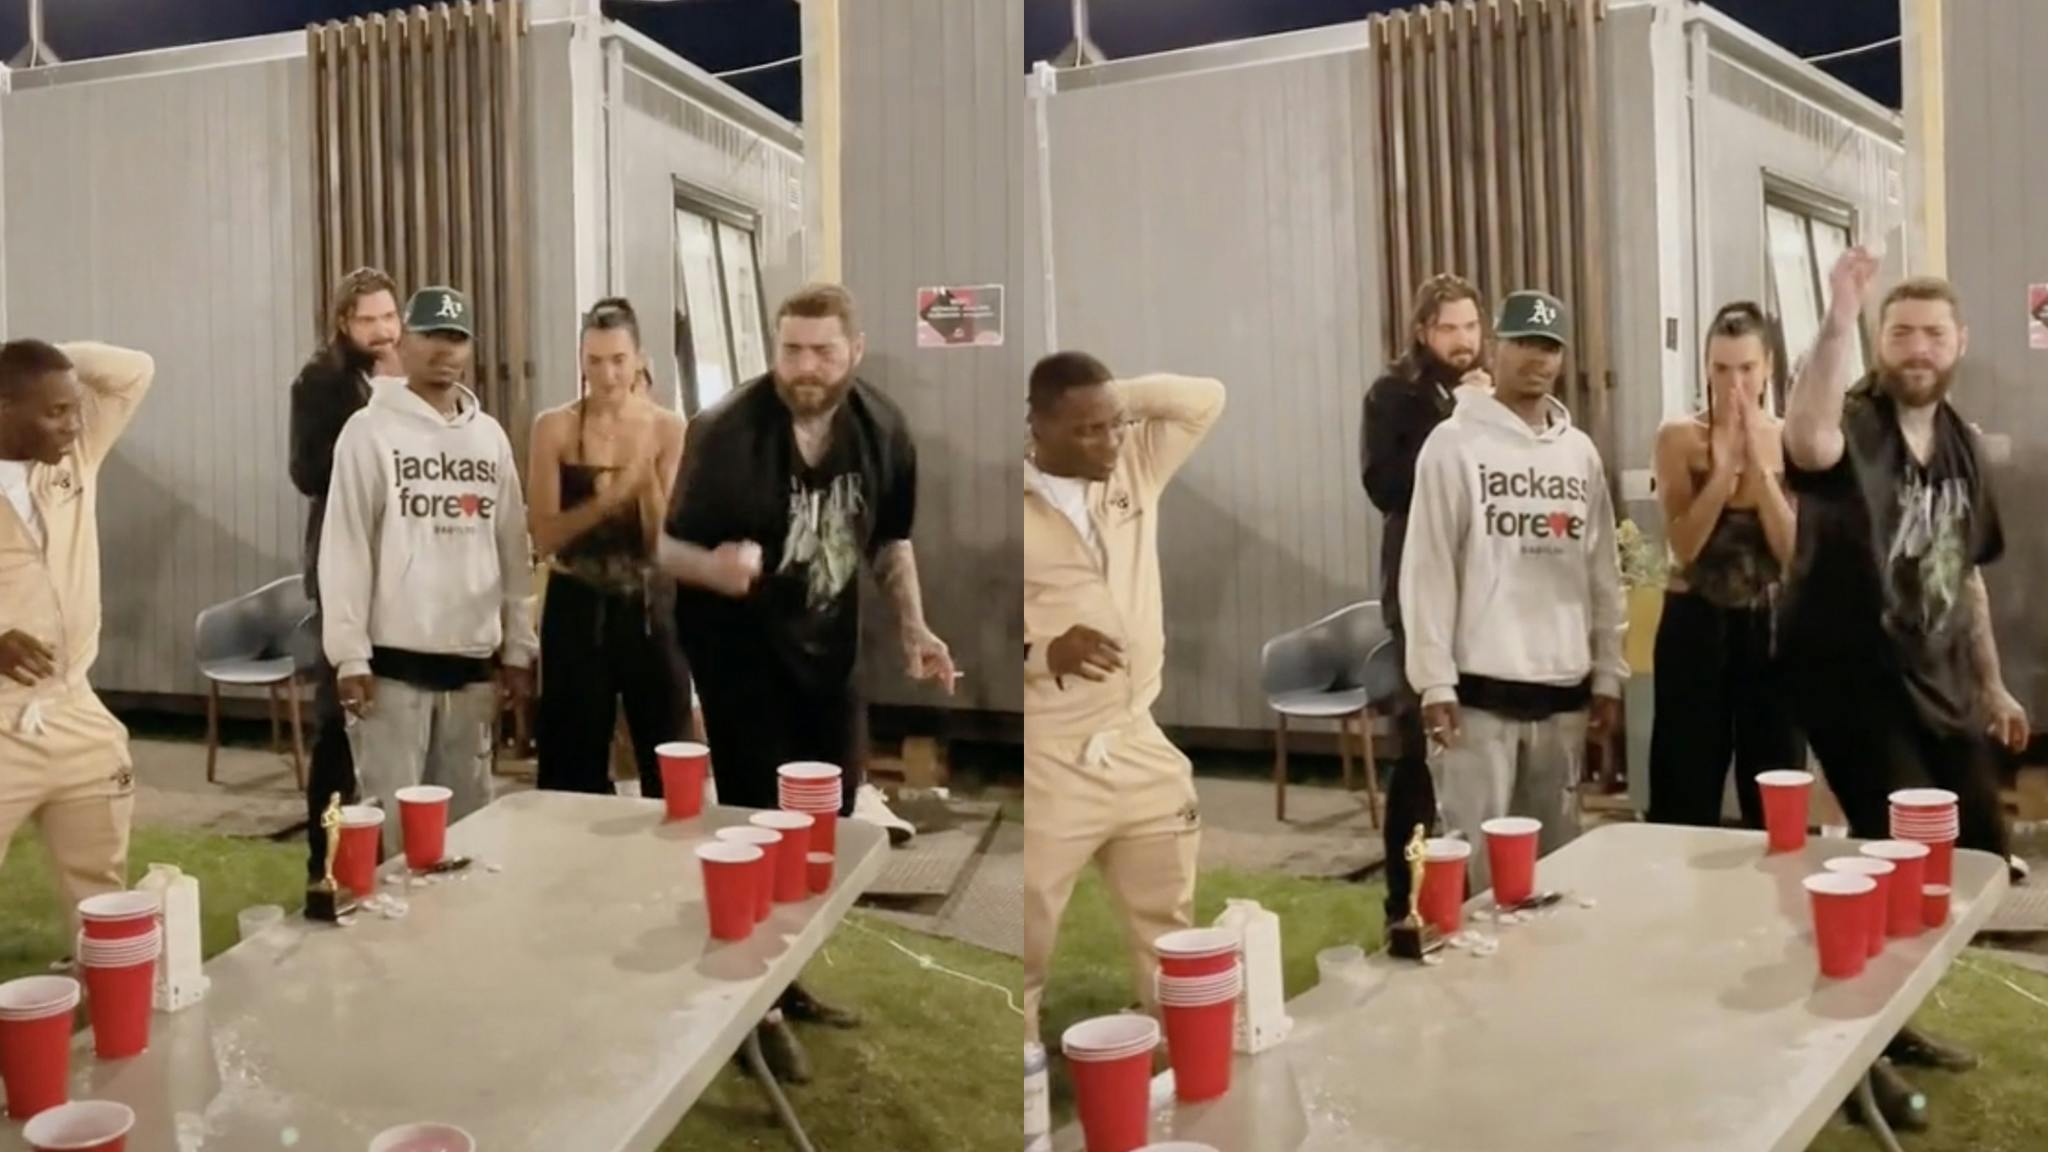 Turnstile played beer pong with Post Malone and Dua Lipa